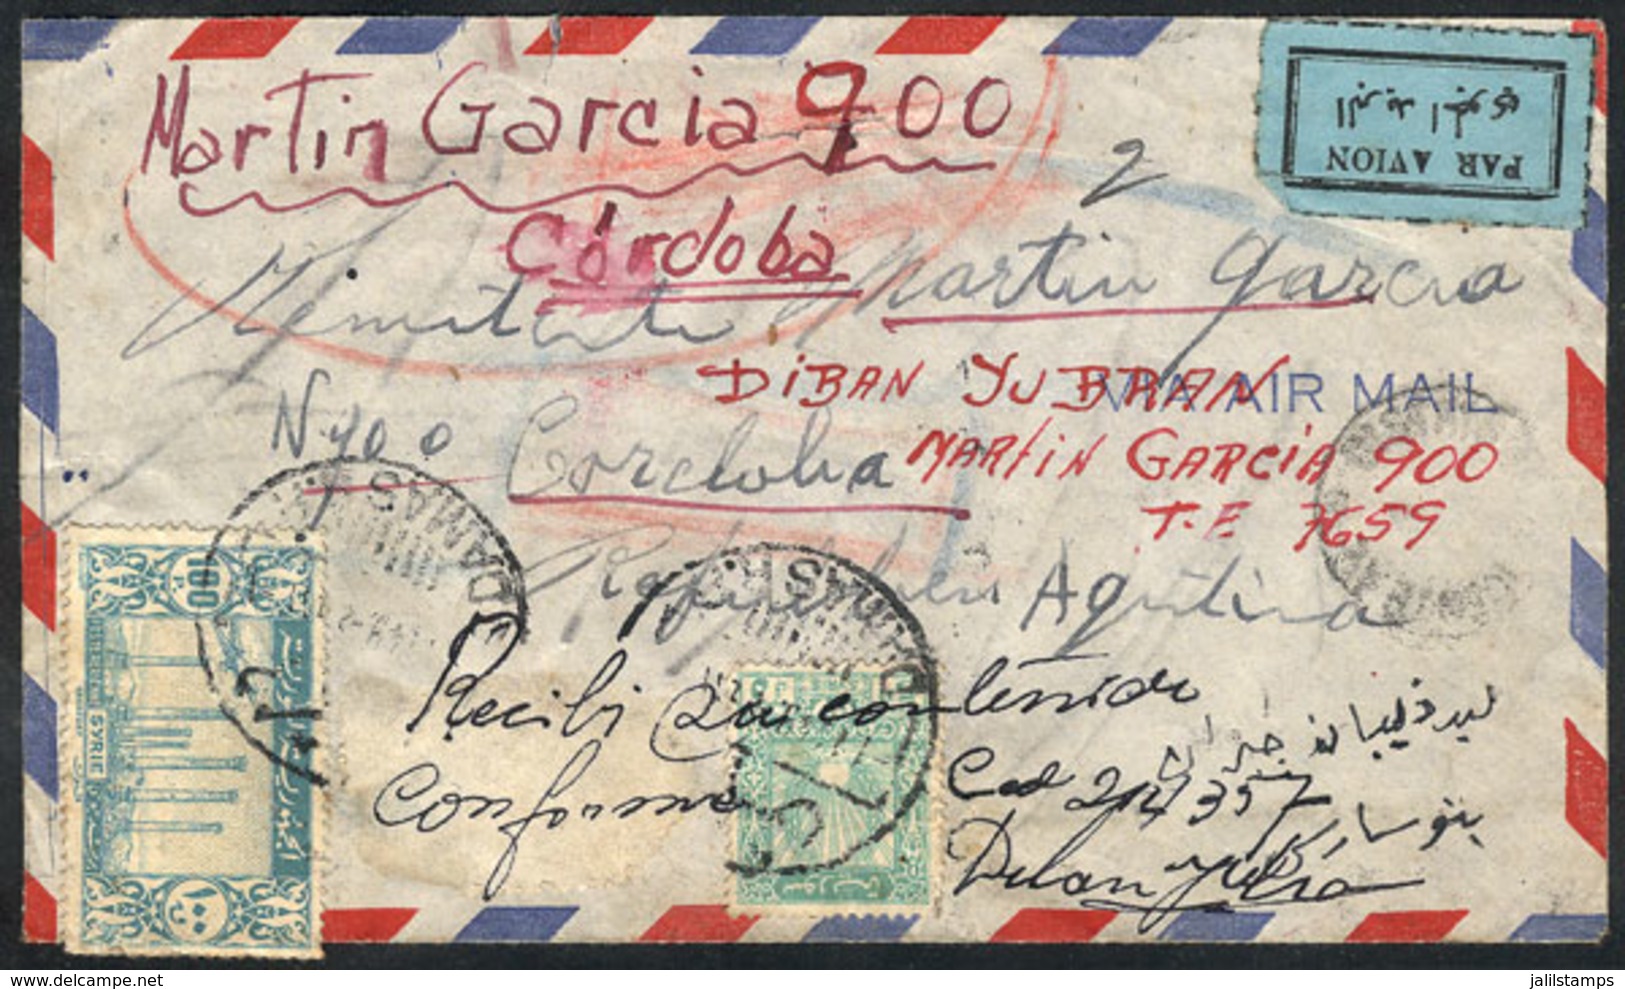 SYRIA: "Airmail Cover Sent To Córdoba (Argentina) On 1/NO/1949, The Address Was Not Very Neat (difficult To Read), And S - Syrie